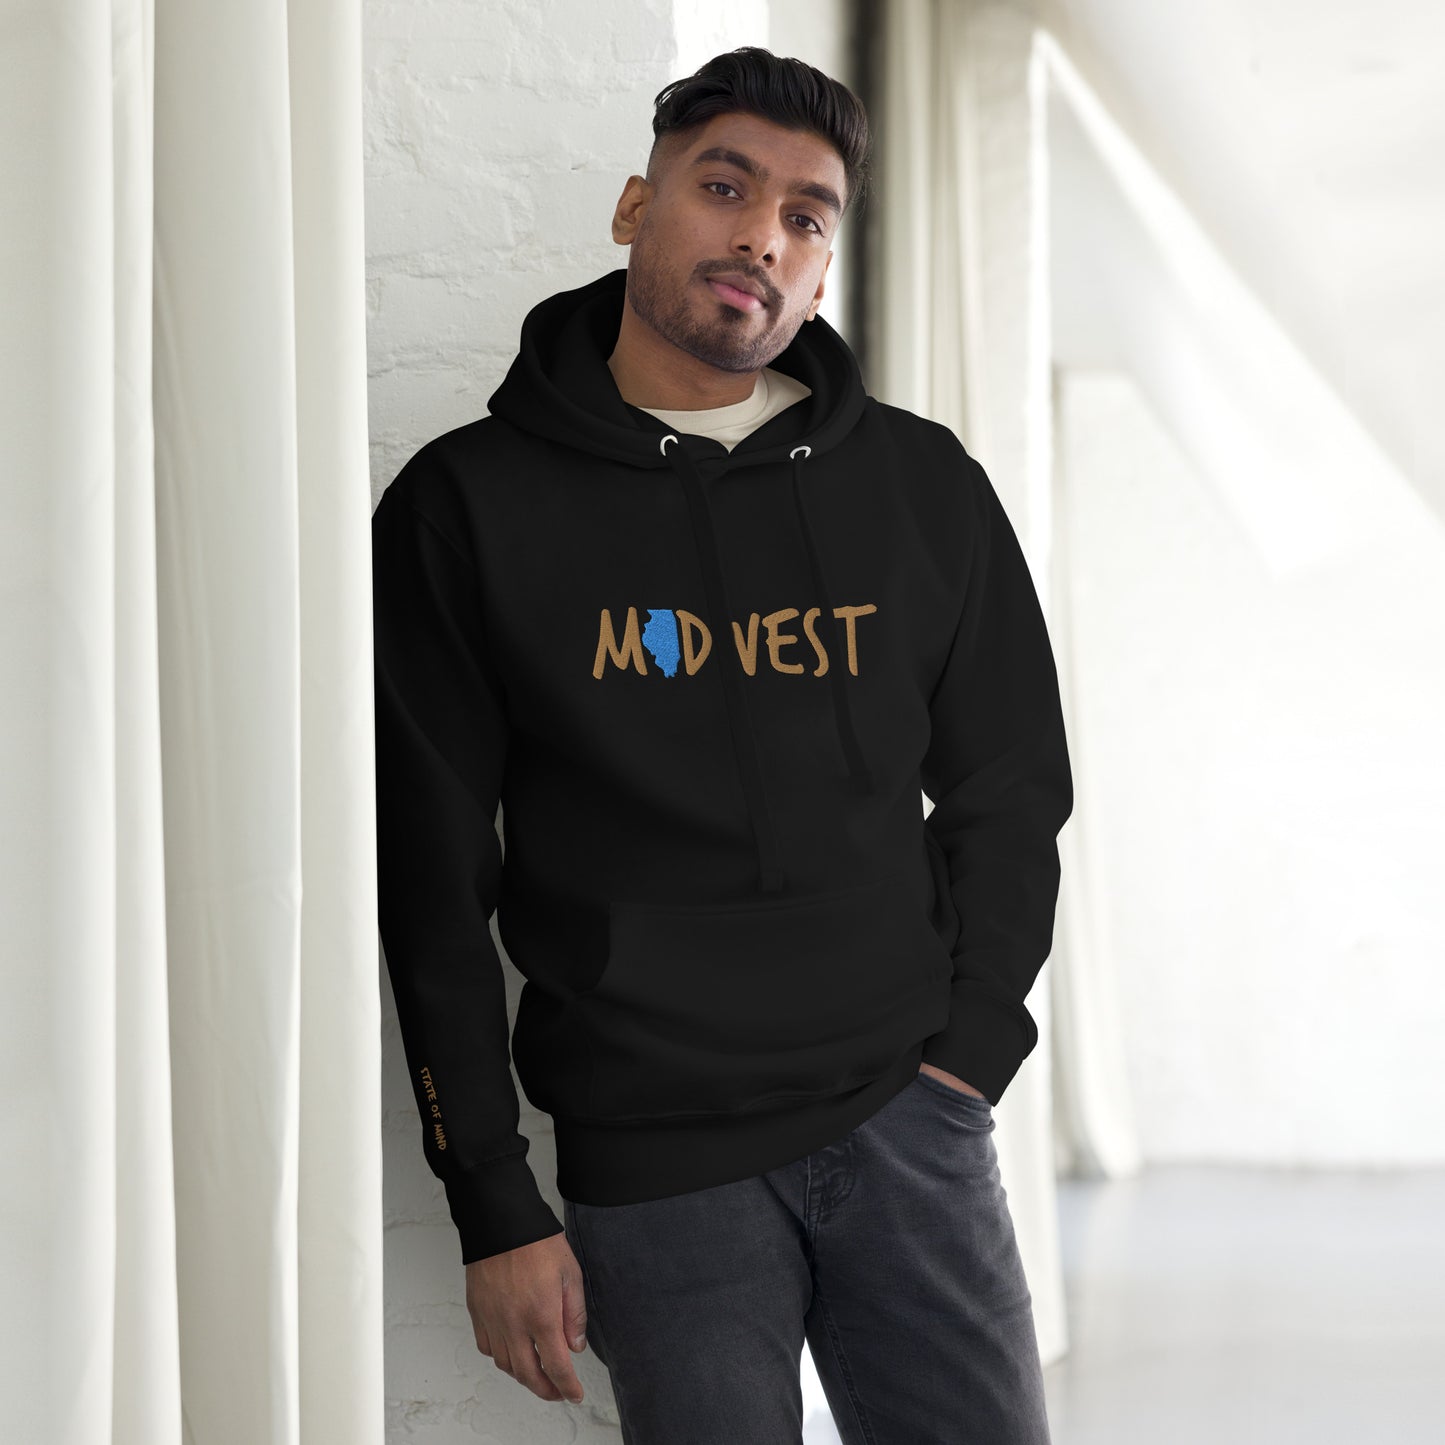 Illinois Midwest 'Love This' Embroidered Unisex Hoodie